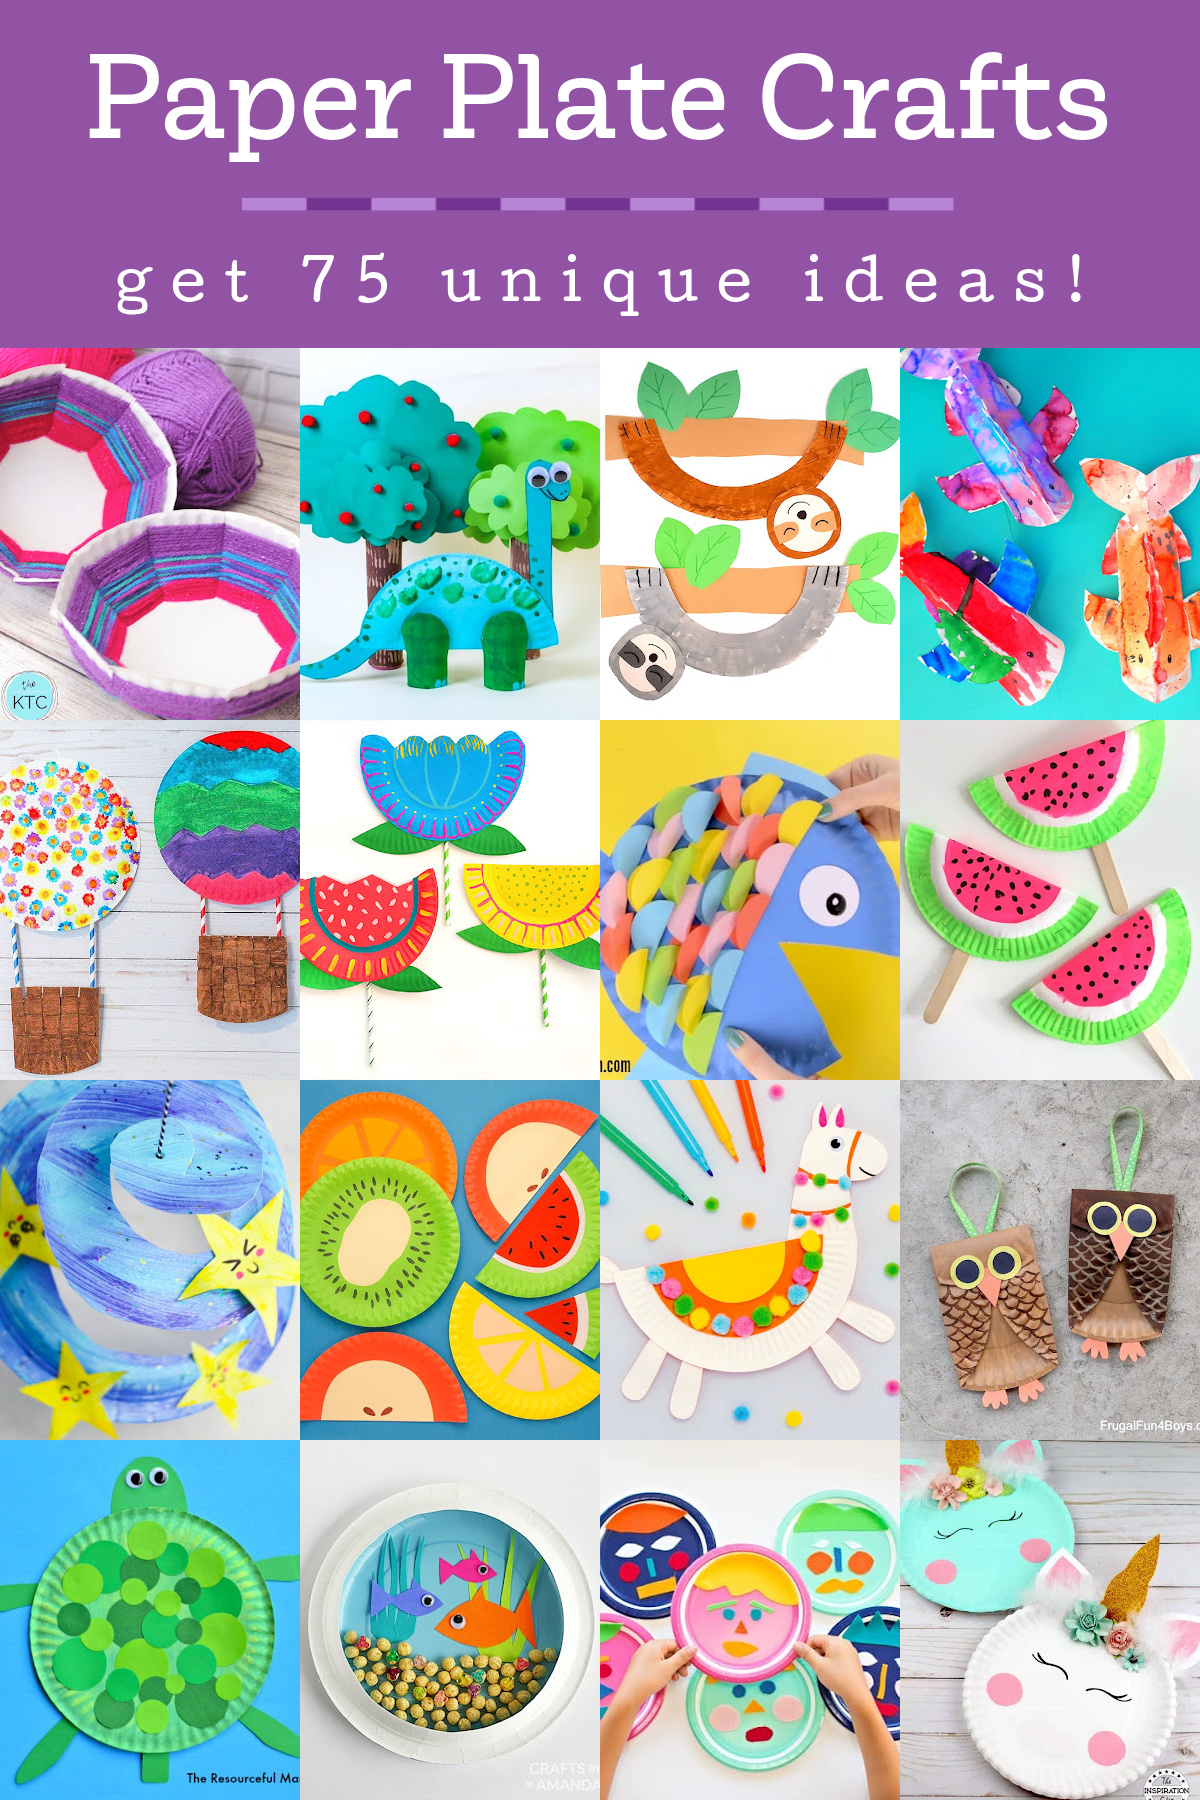 Creative and Fun Paper Plate Crafts for Every Occasion - Mod Podge Rocks